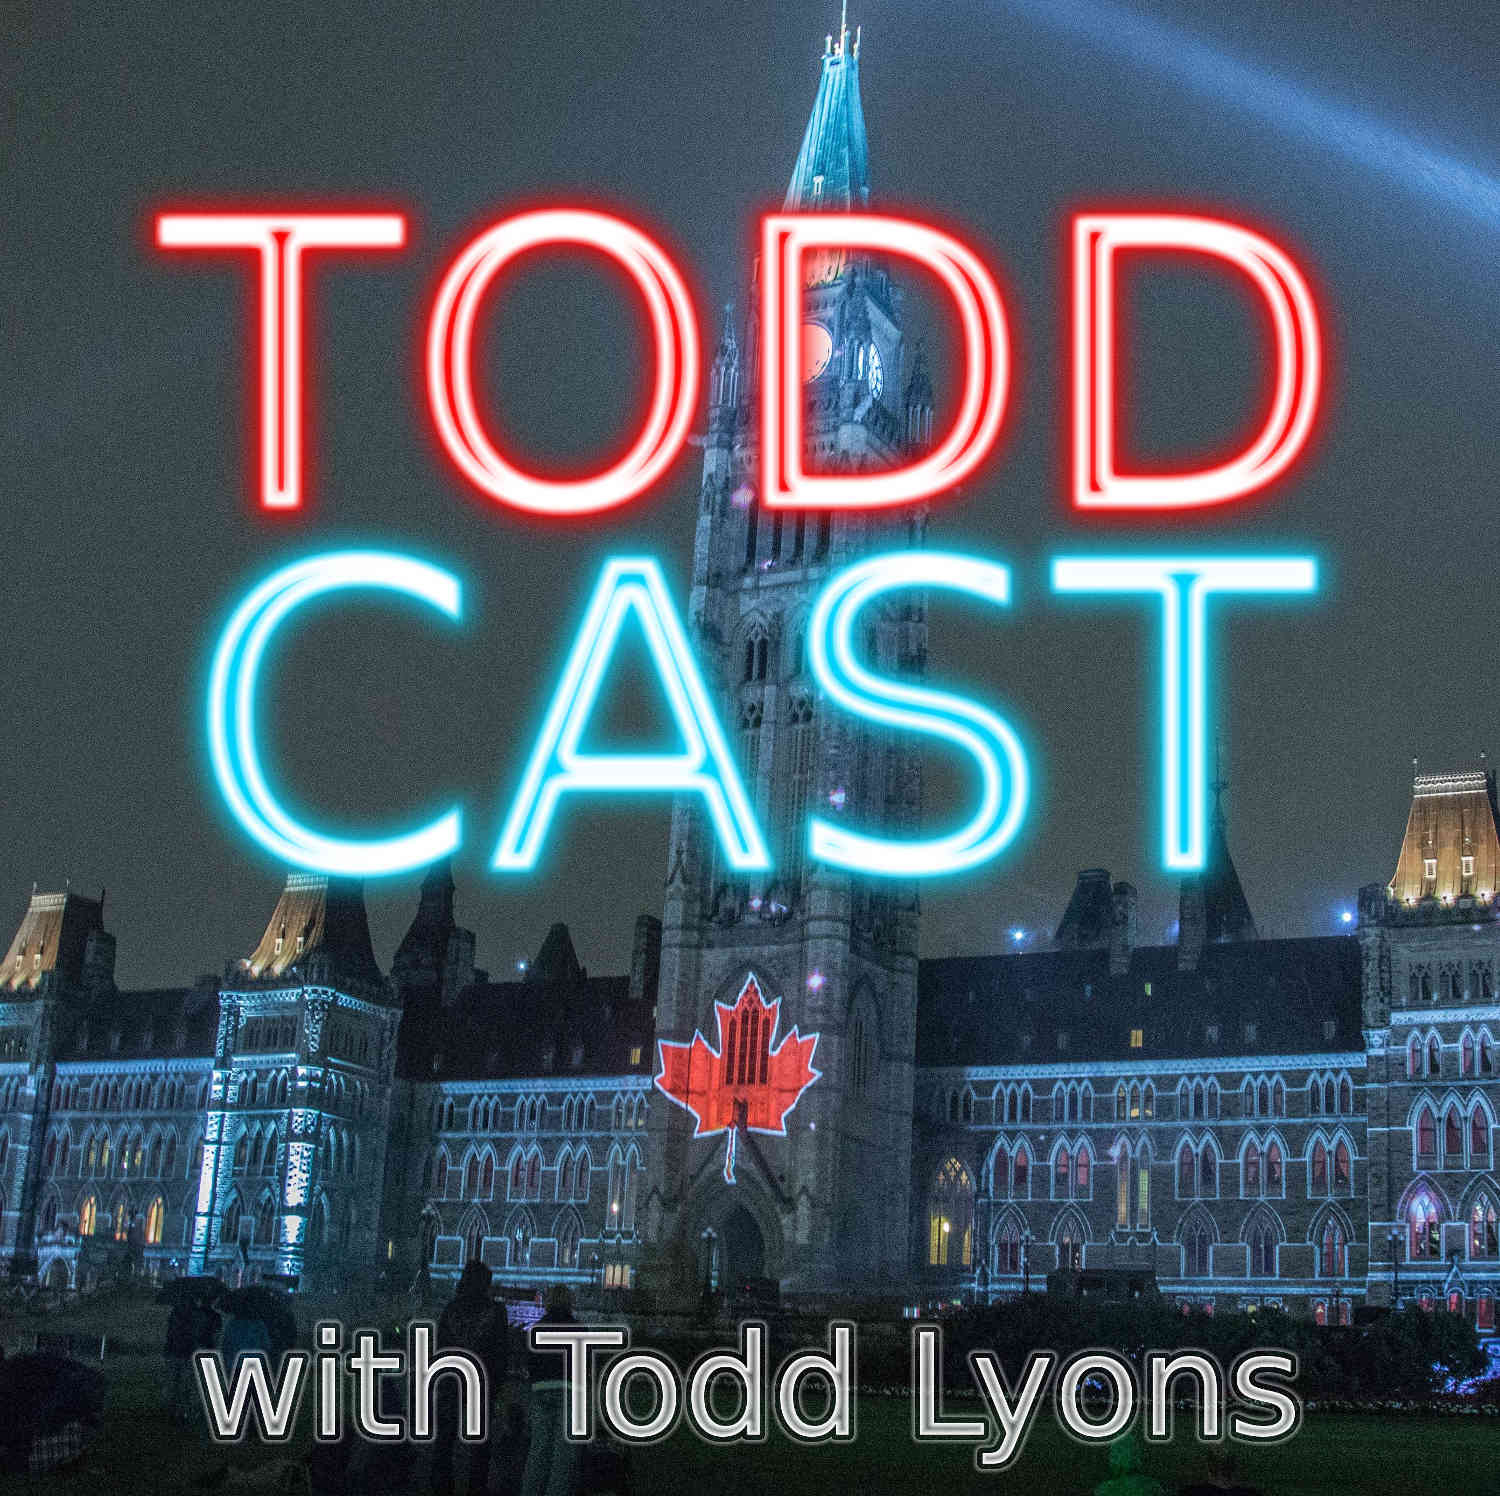 Toddcast-cover.jpg